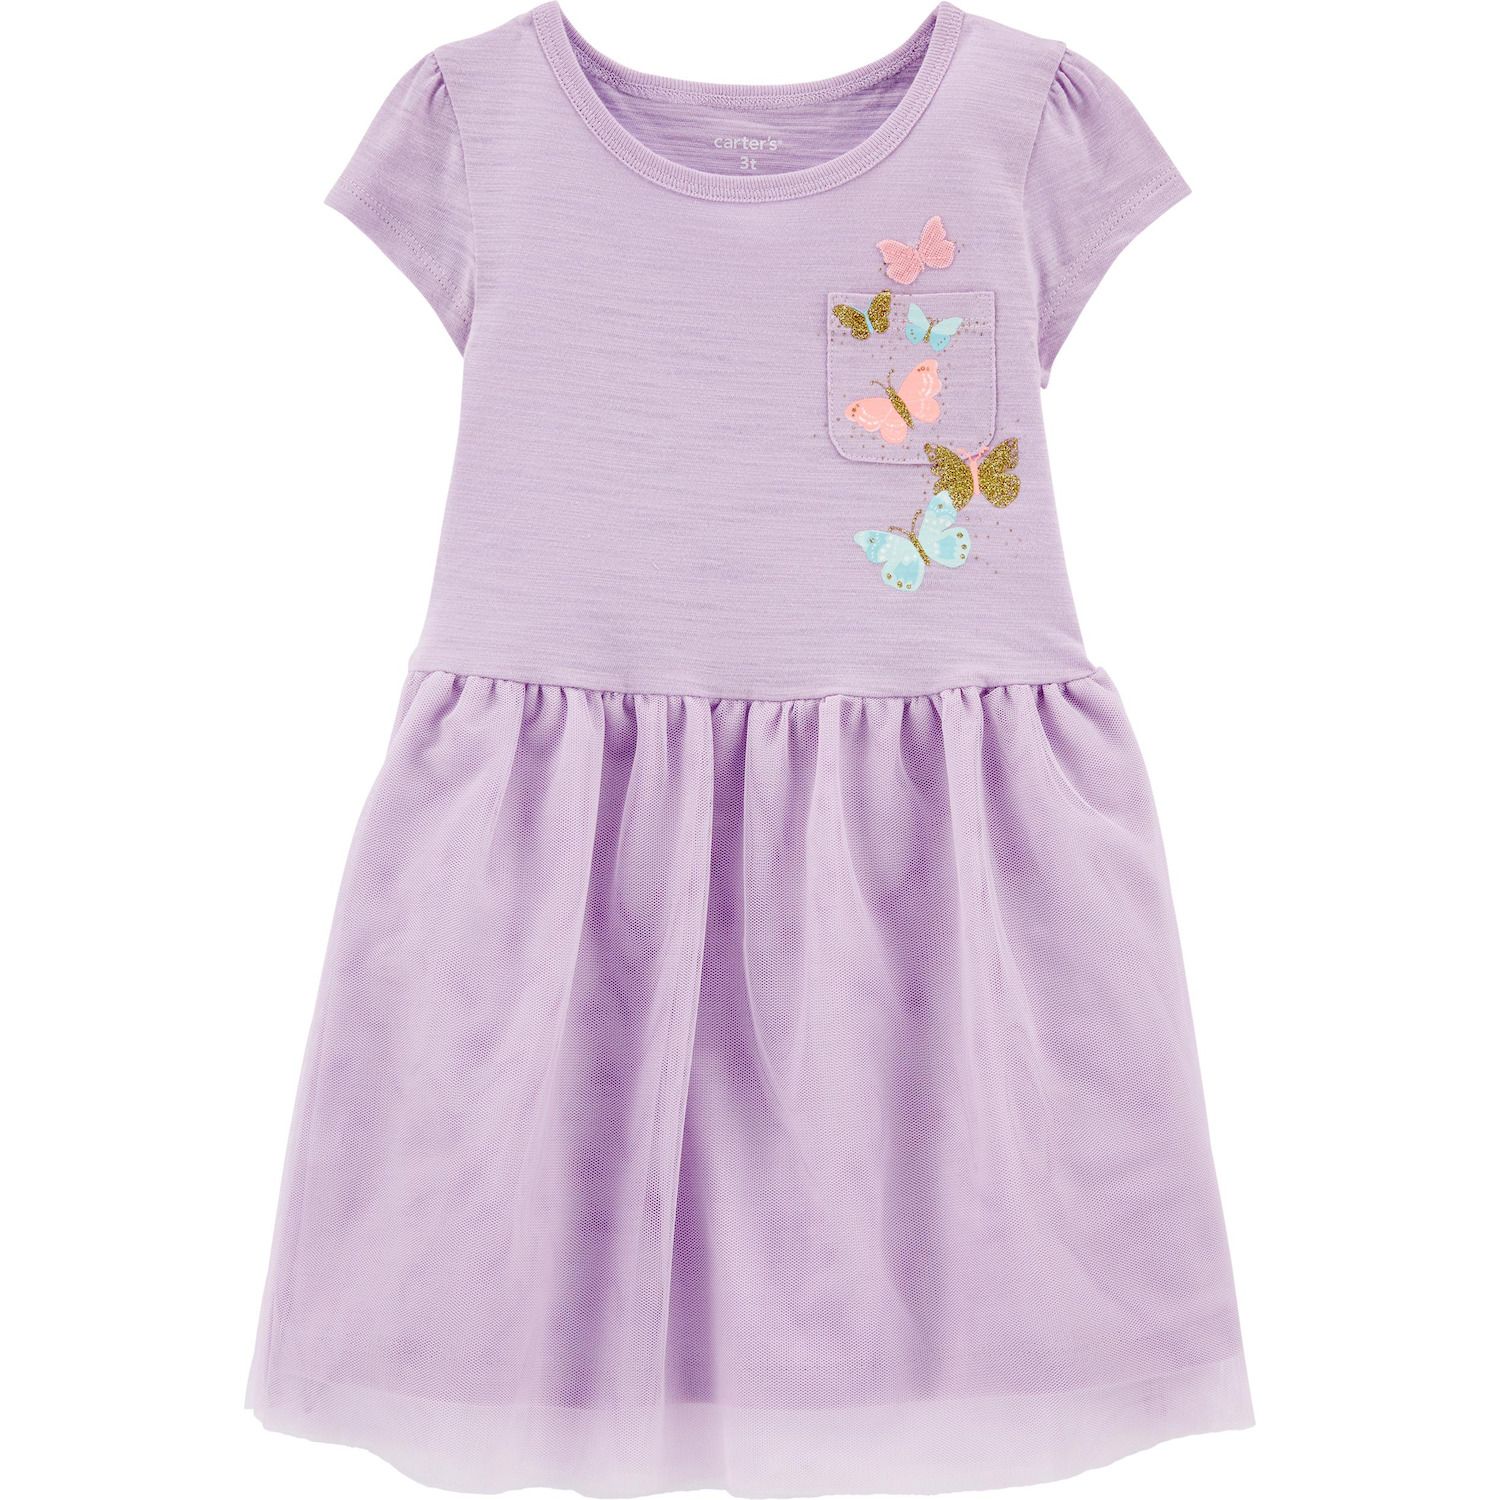 purple dresses for toddlers